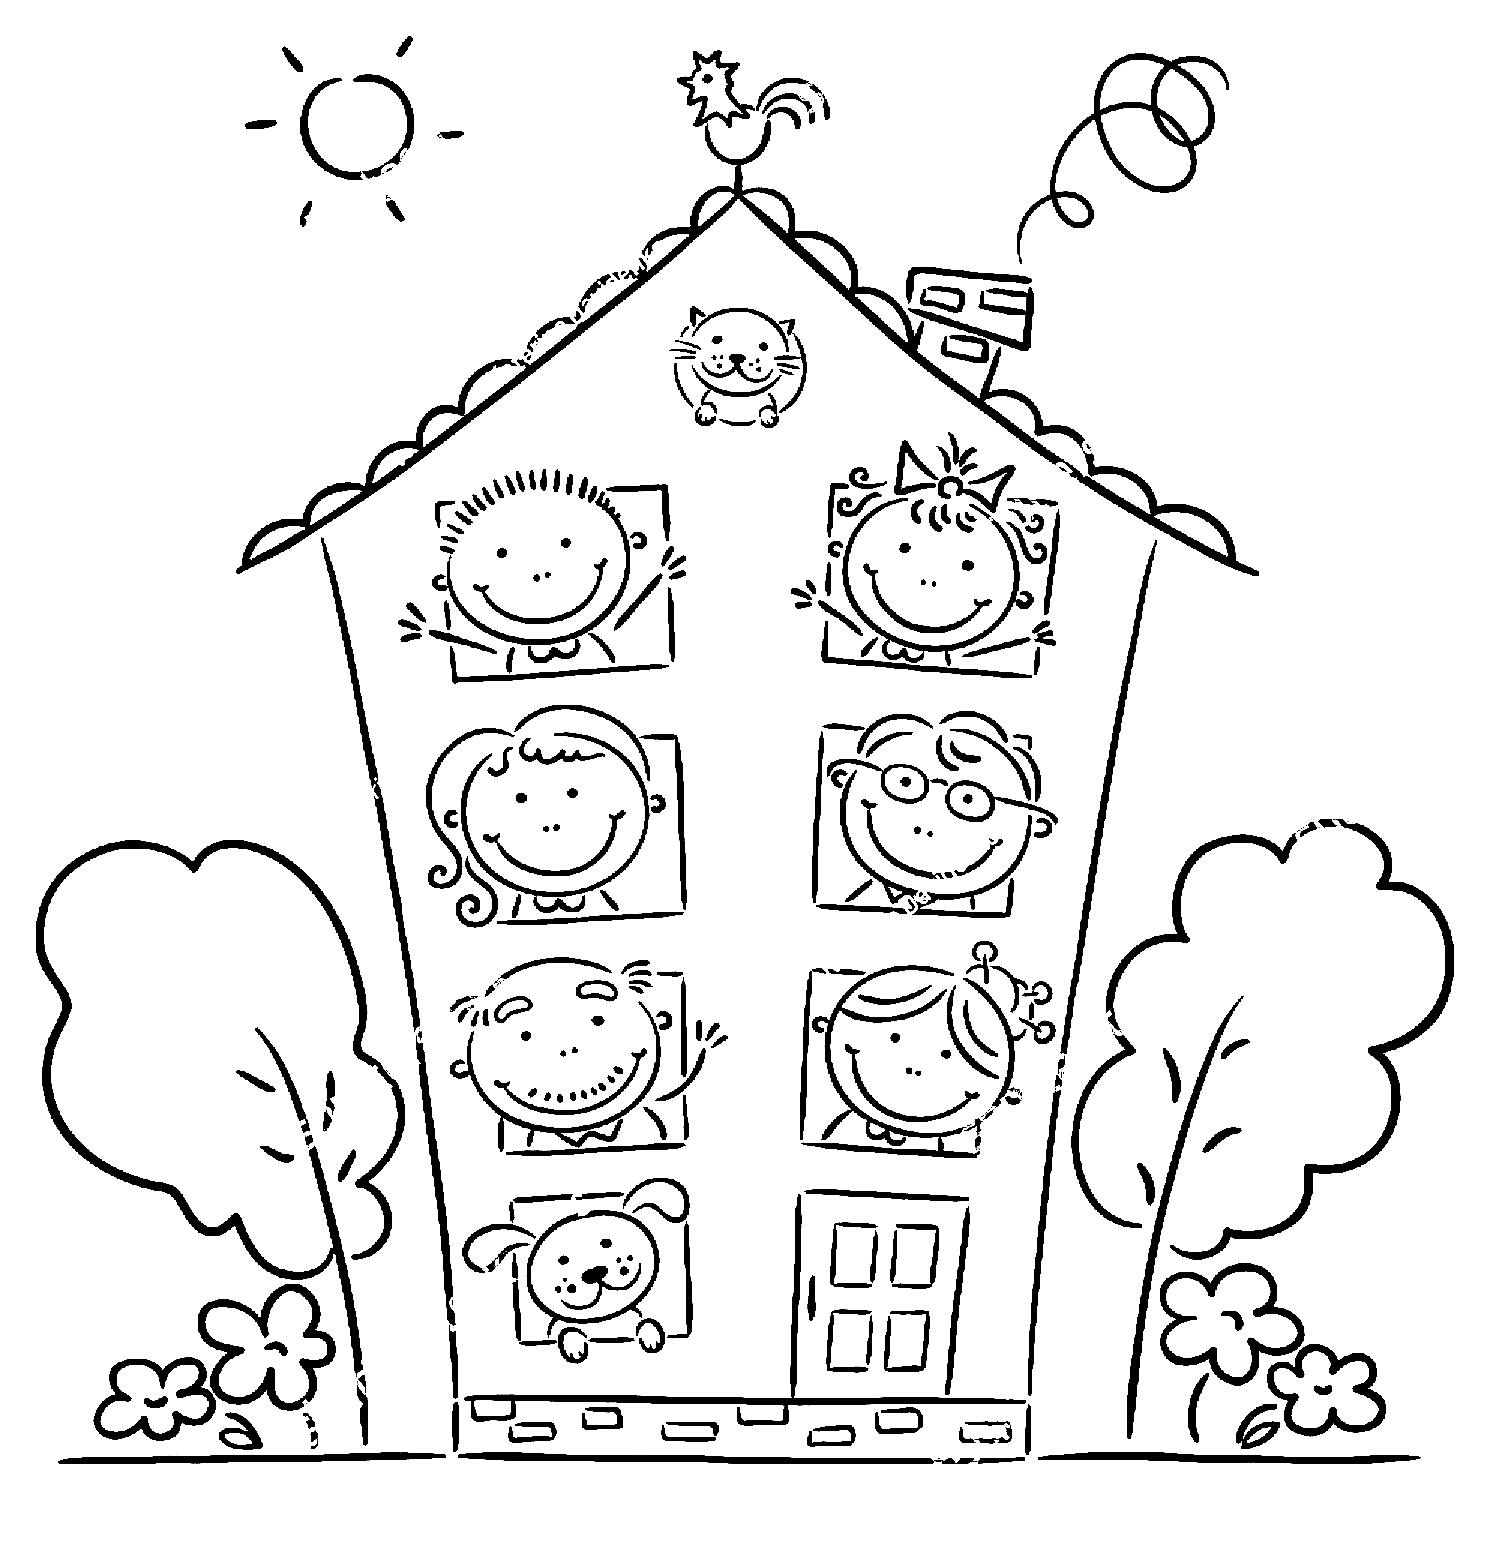 Big Family is at Home Coloring Page